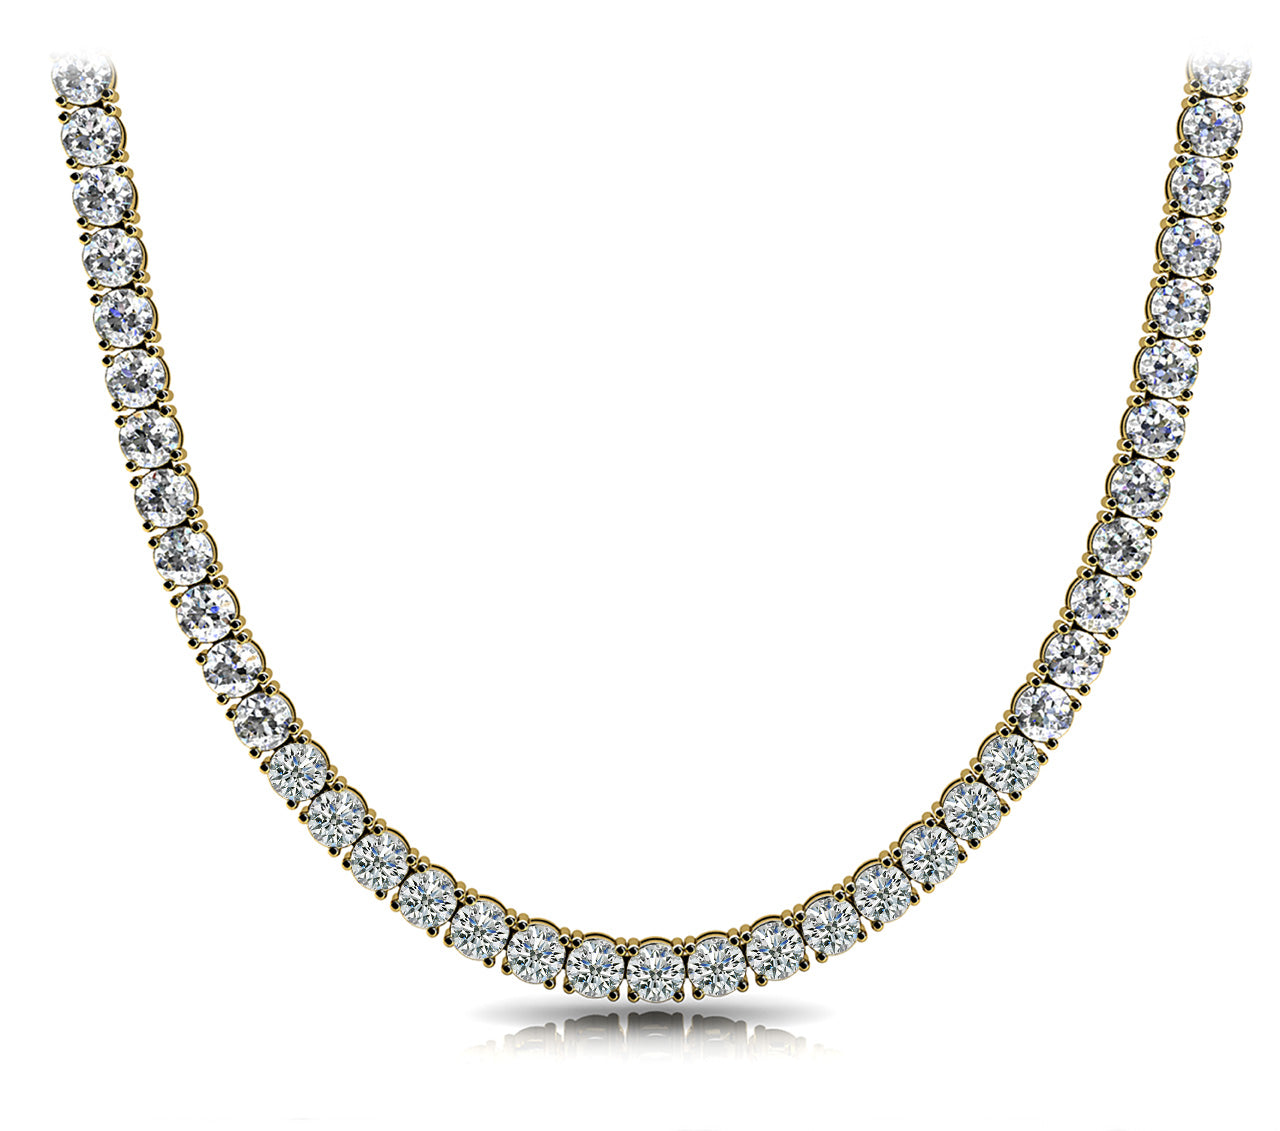 THE RICH CO - 4 PRONG RIVIERA DIAMOND NECKLACE